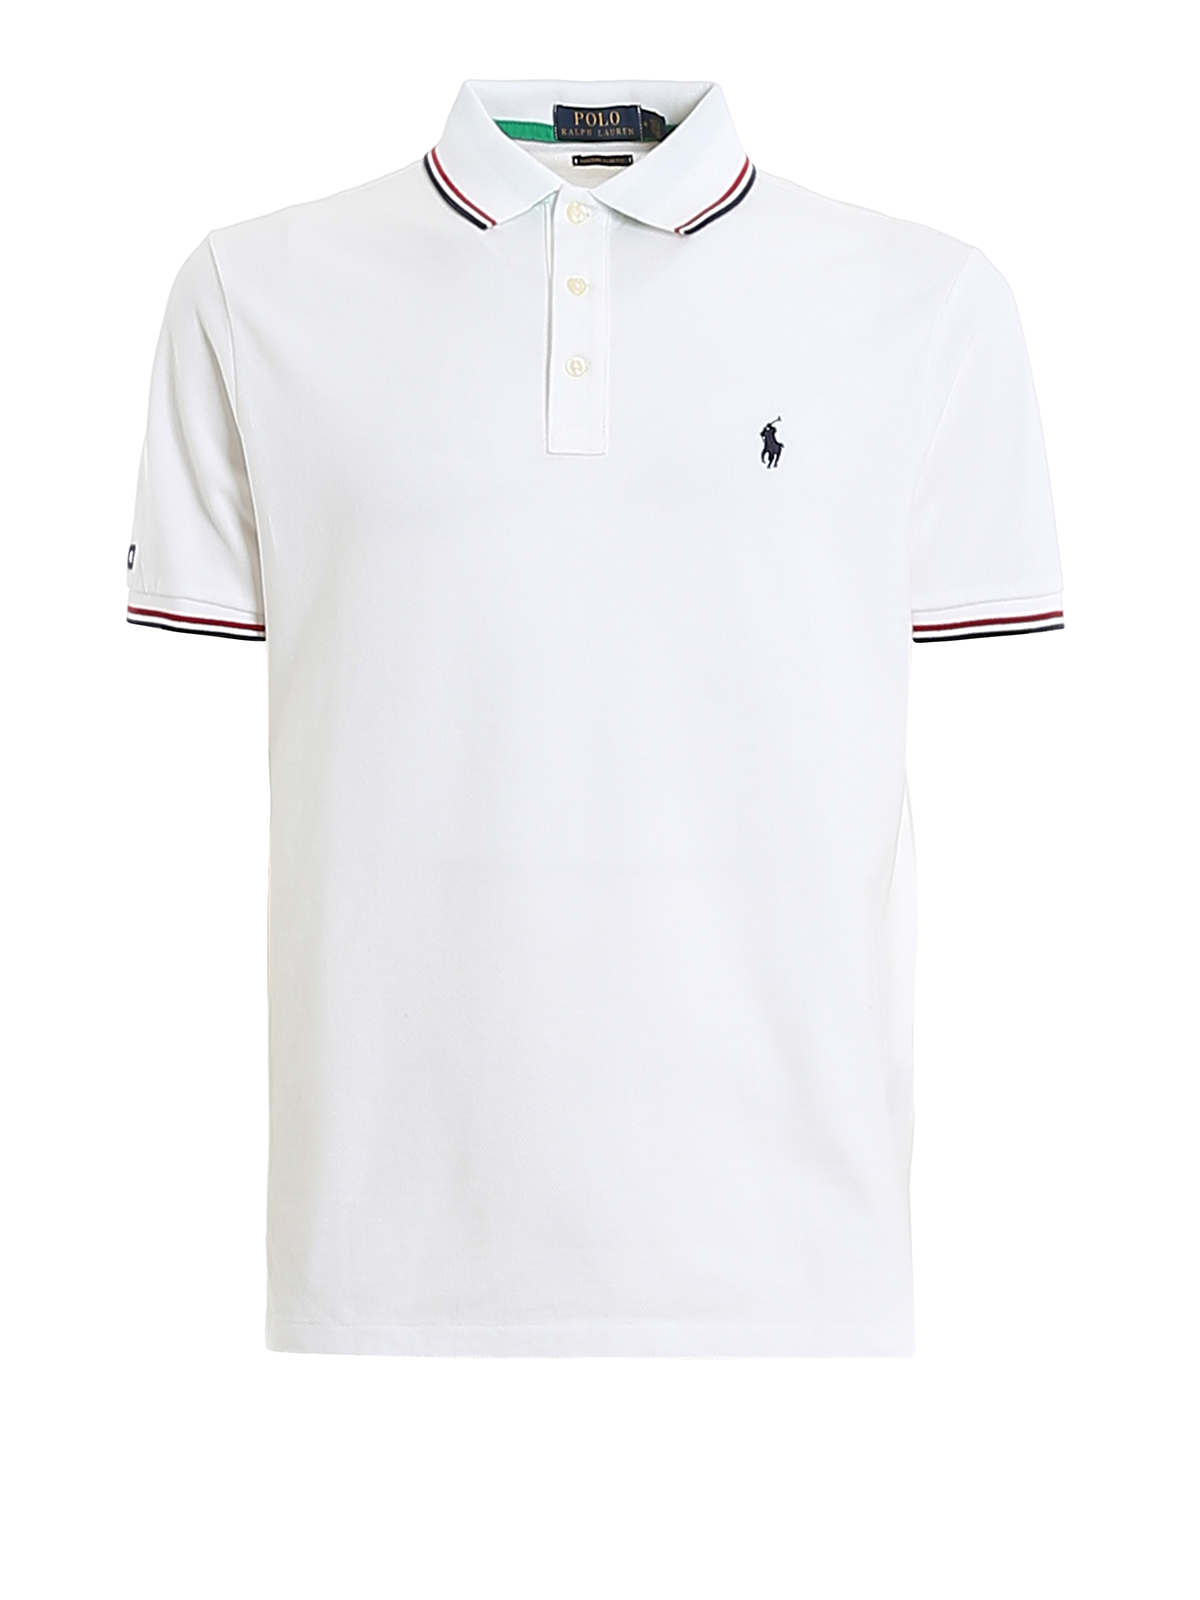 POLO RALPH LAUREN PIQUE COTTON T-SHIRT WITH CONTRASTING PIPING